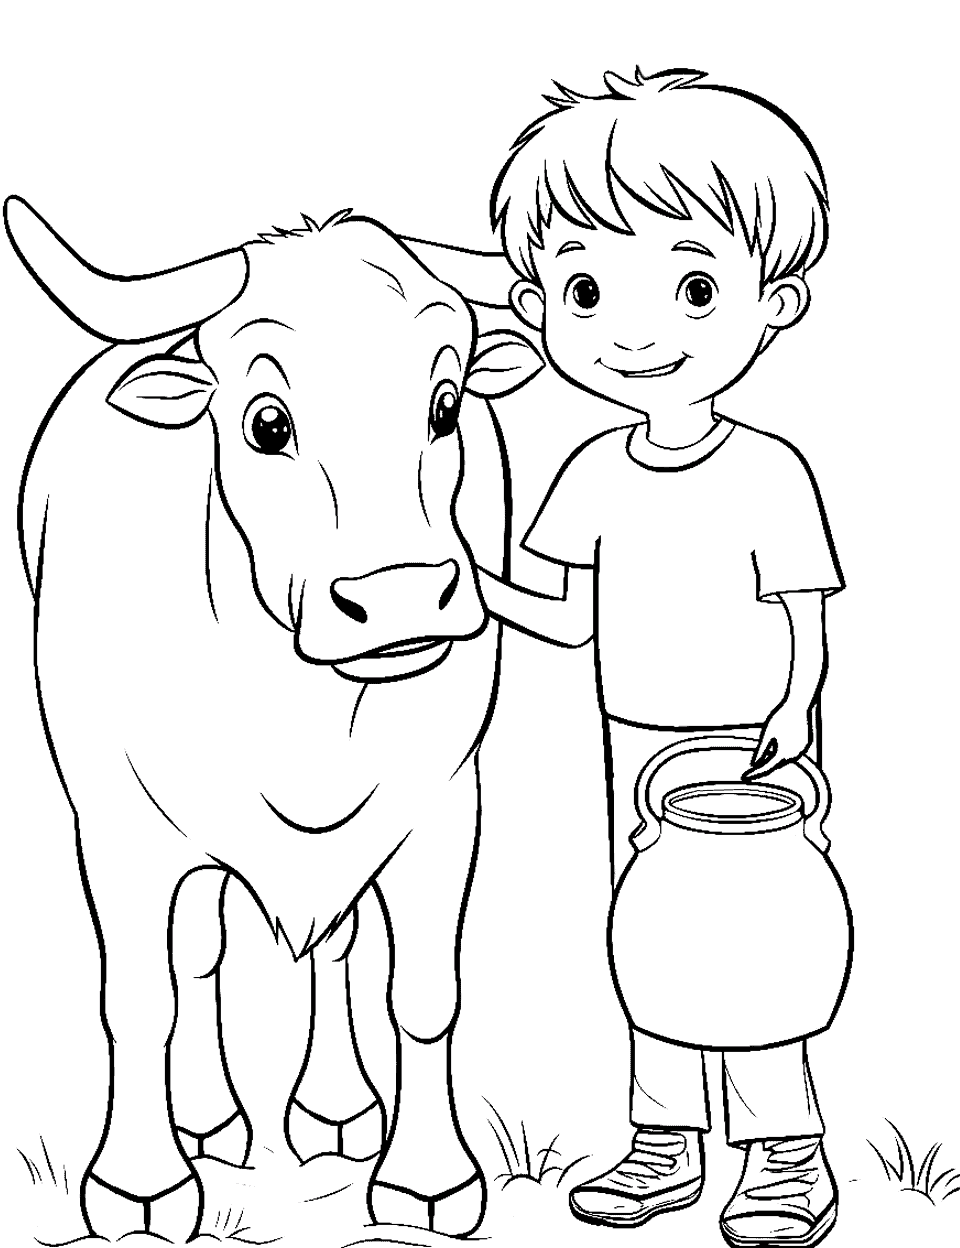 Coloring A Cow Cute Farm Animals Coloring Page | Drawing and coloring for  kids - video Dailymotion